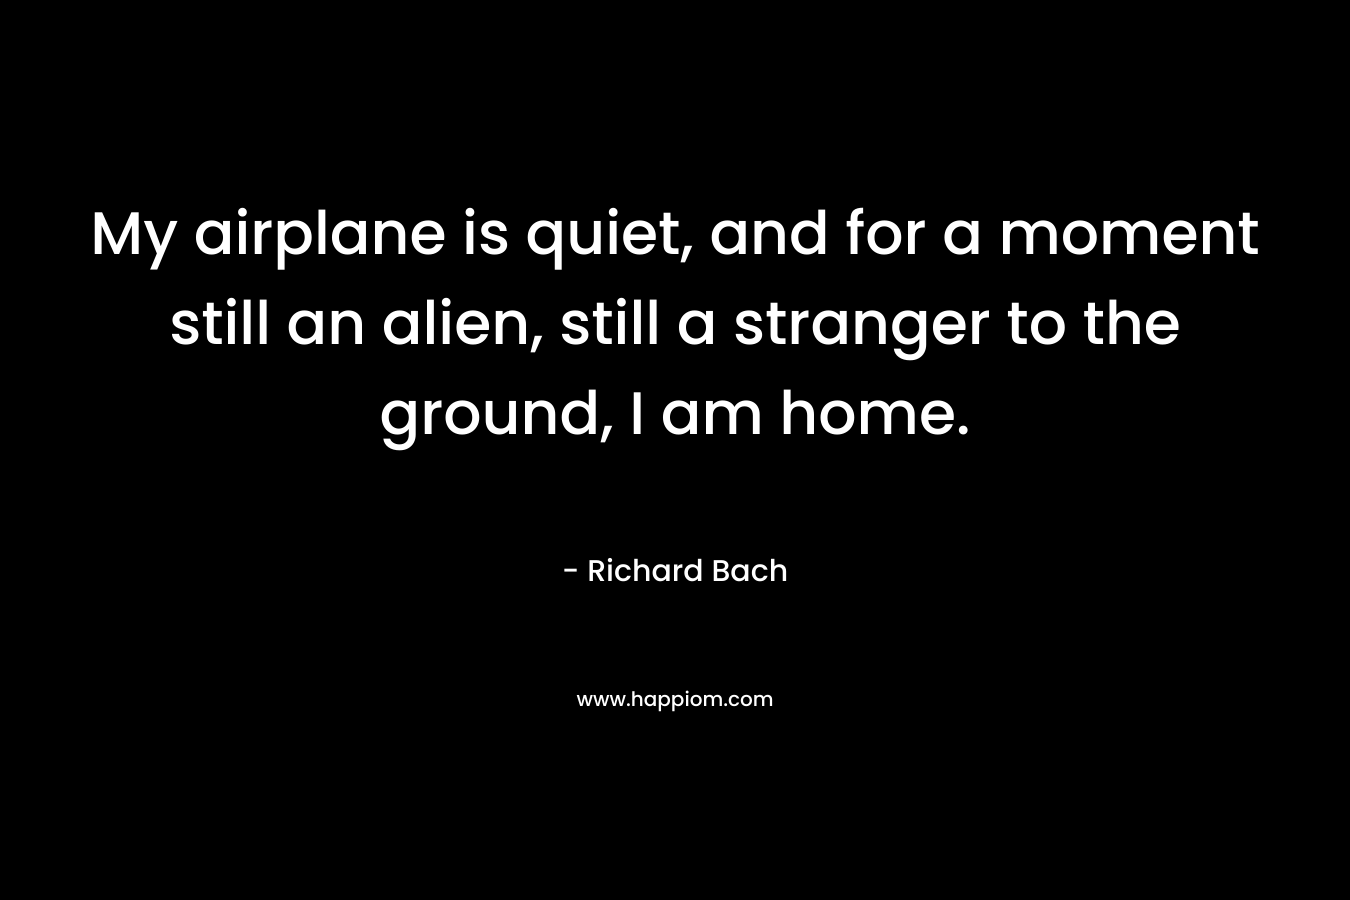 My airplane is quiet, and for a moment still an alien, still a stranger to the ground, I am home. – Richard Bach